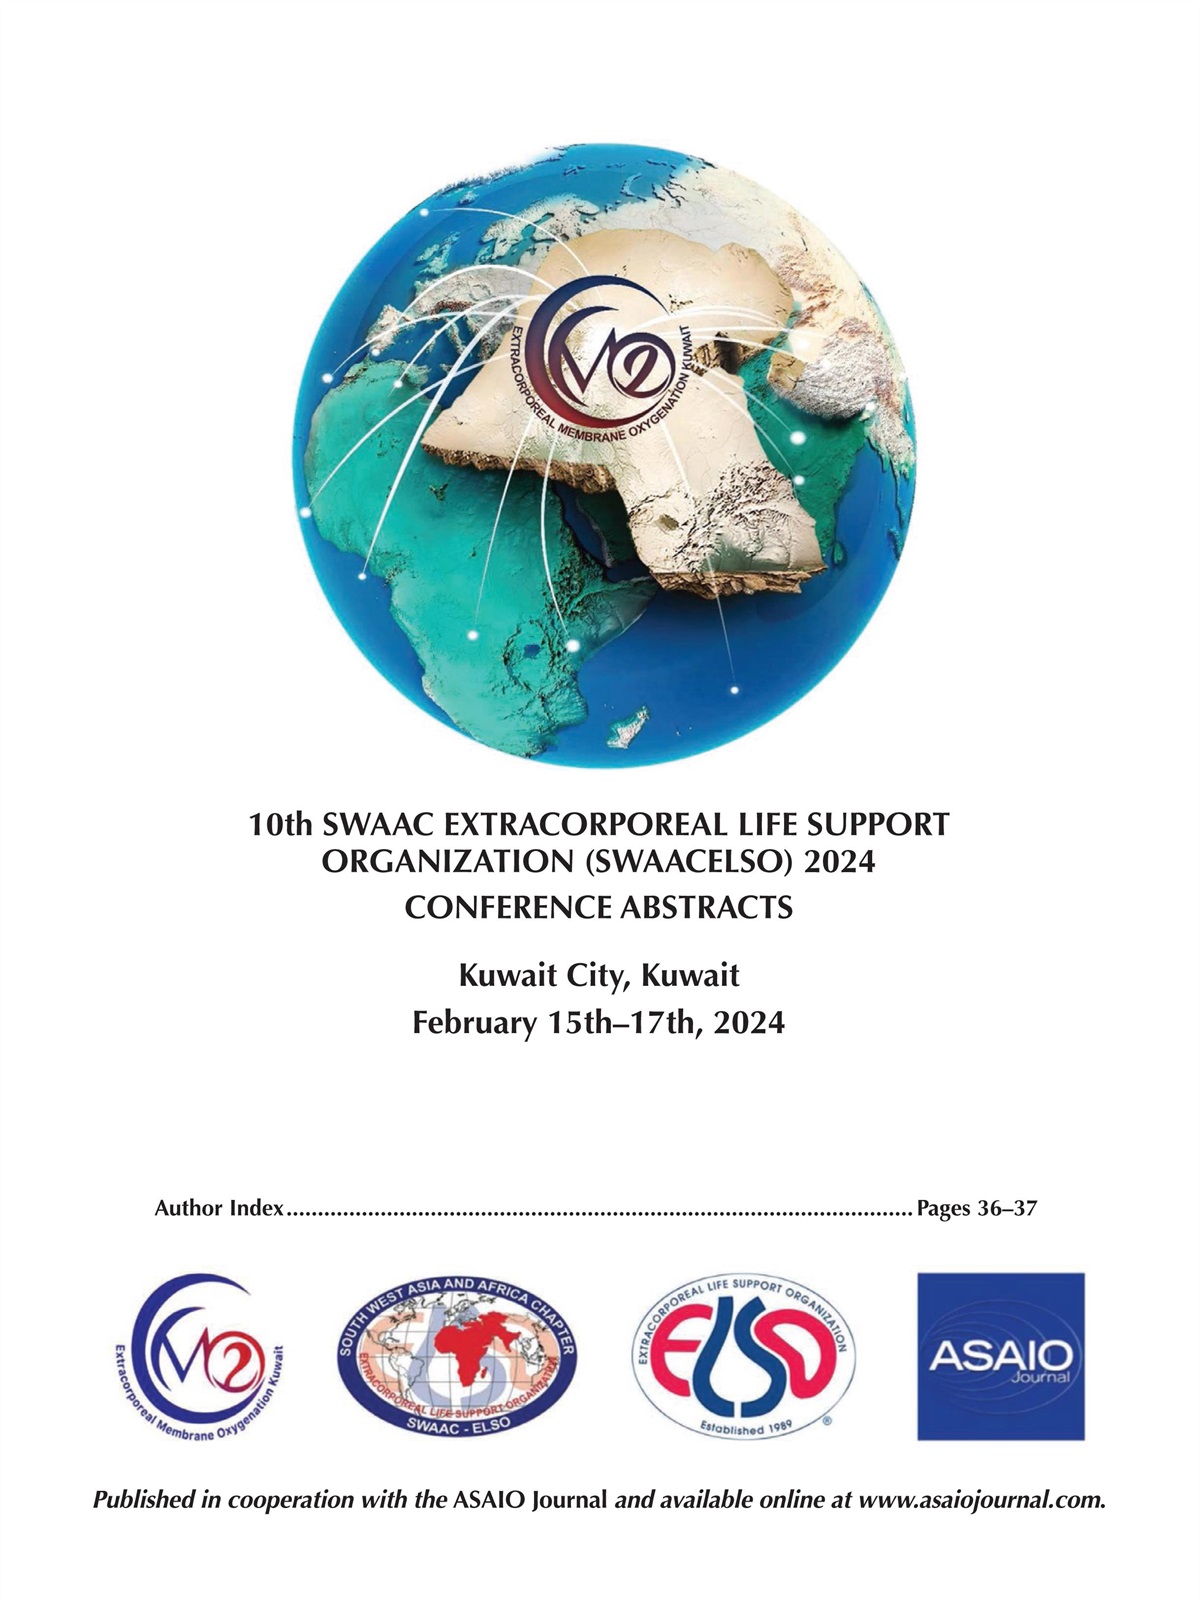 10th SWAAC Extracorporeal Life Support Organization (SWAACELSO) 2024 Conference Abstracts, Kuwait City, Kuwait, February 15th–17th, 2024